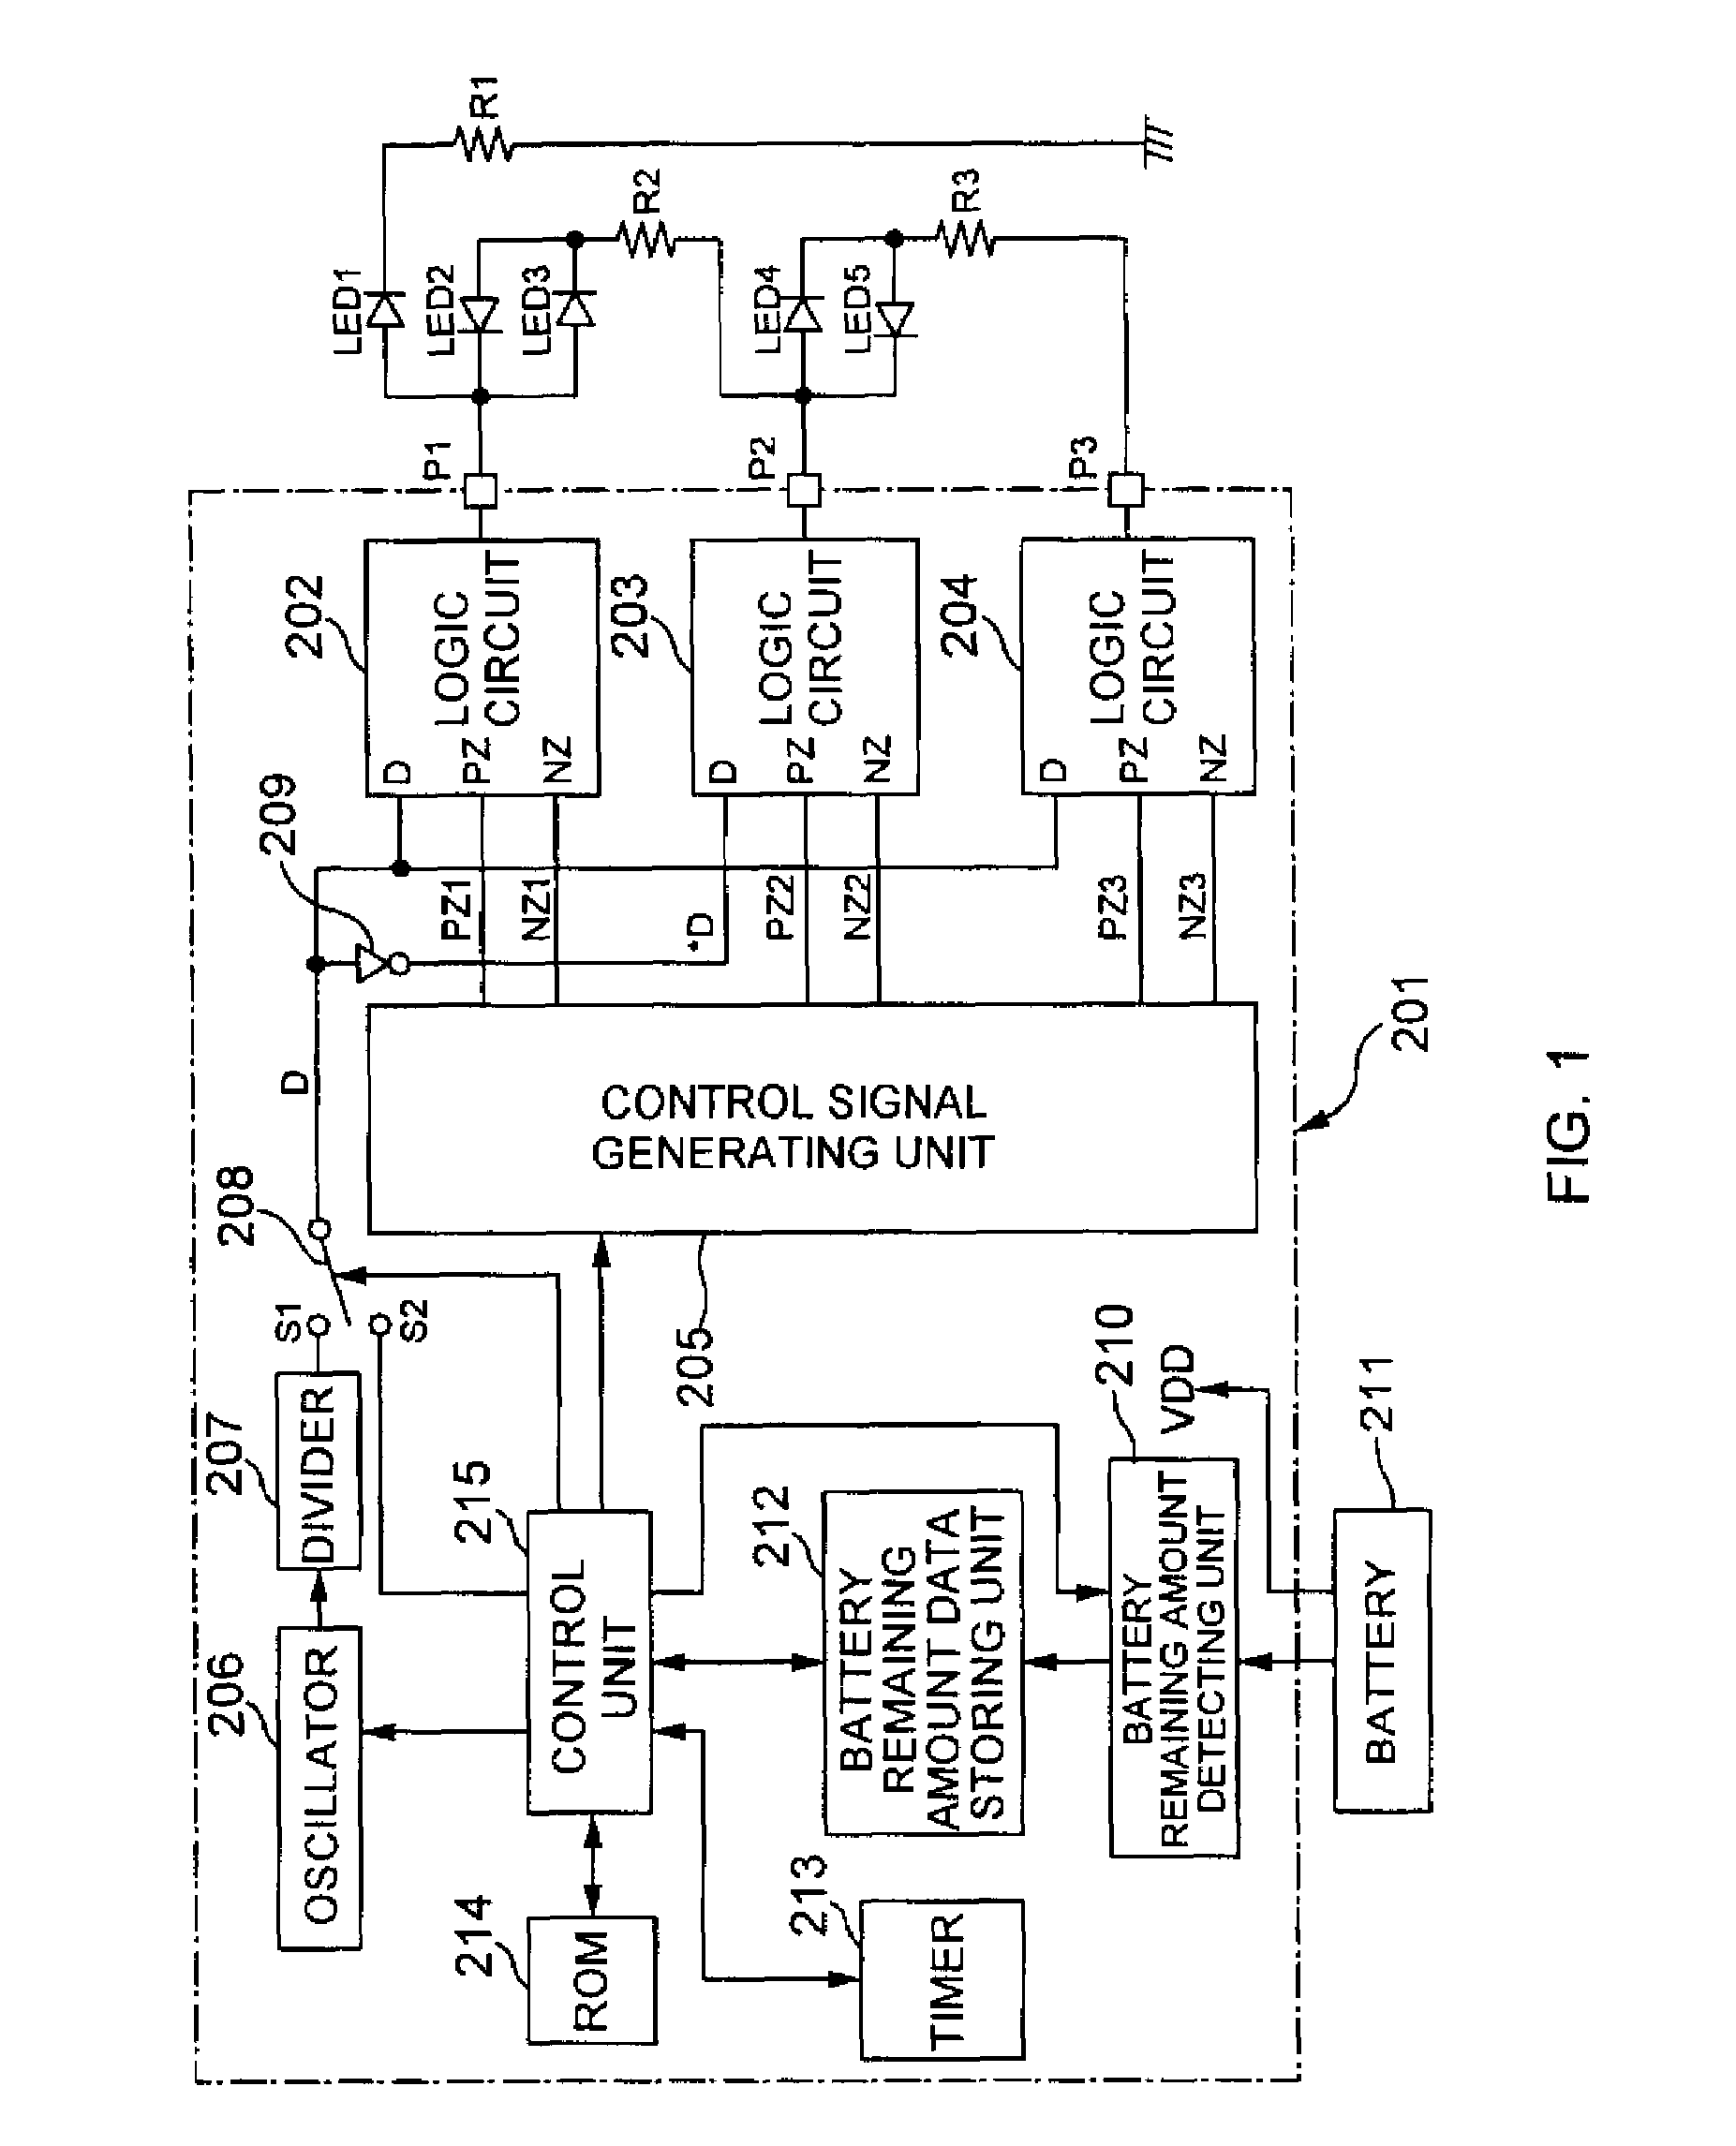 Light emitting device drive controller, and a light emitting device driving apparatus